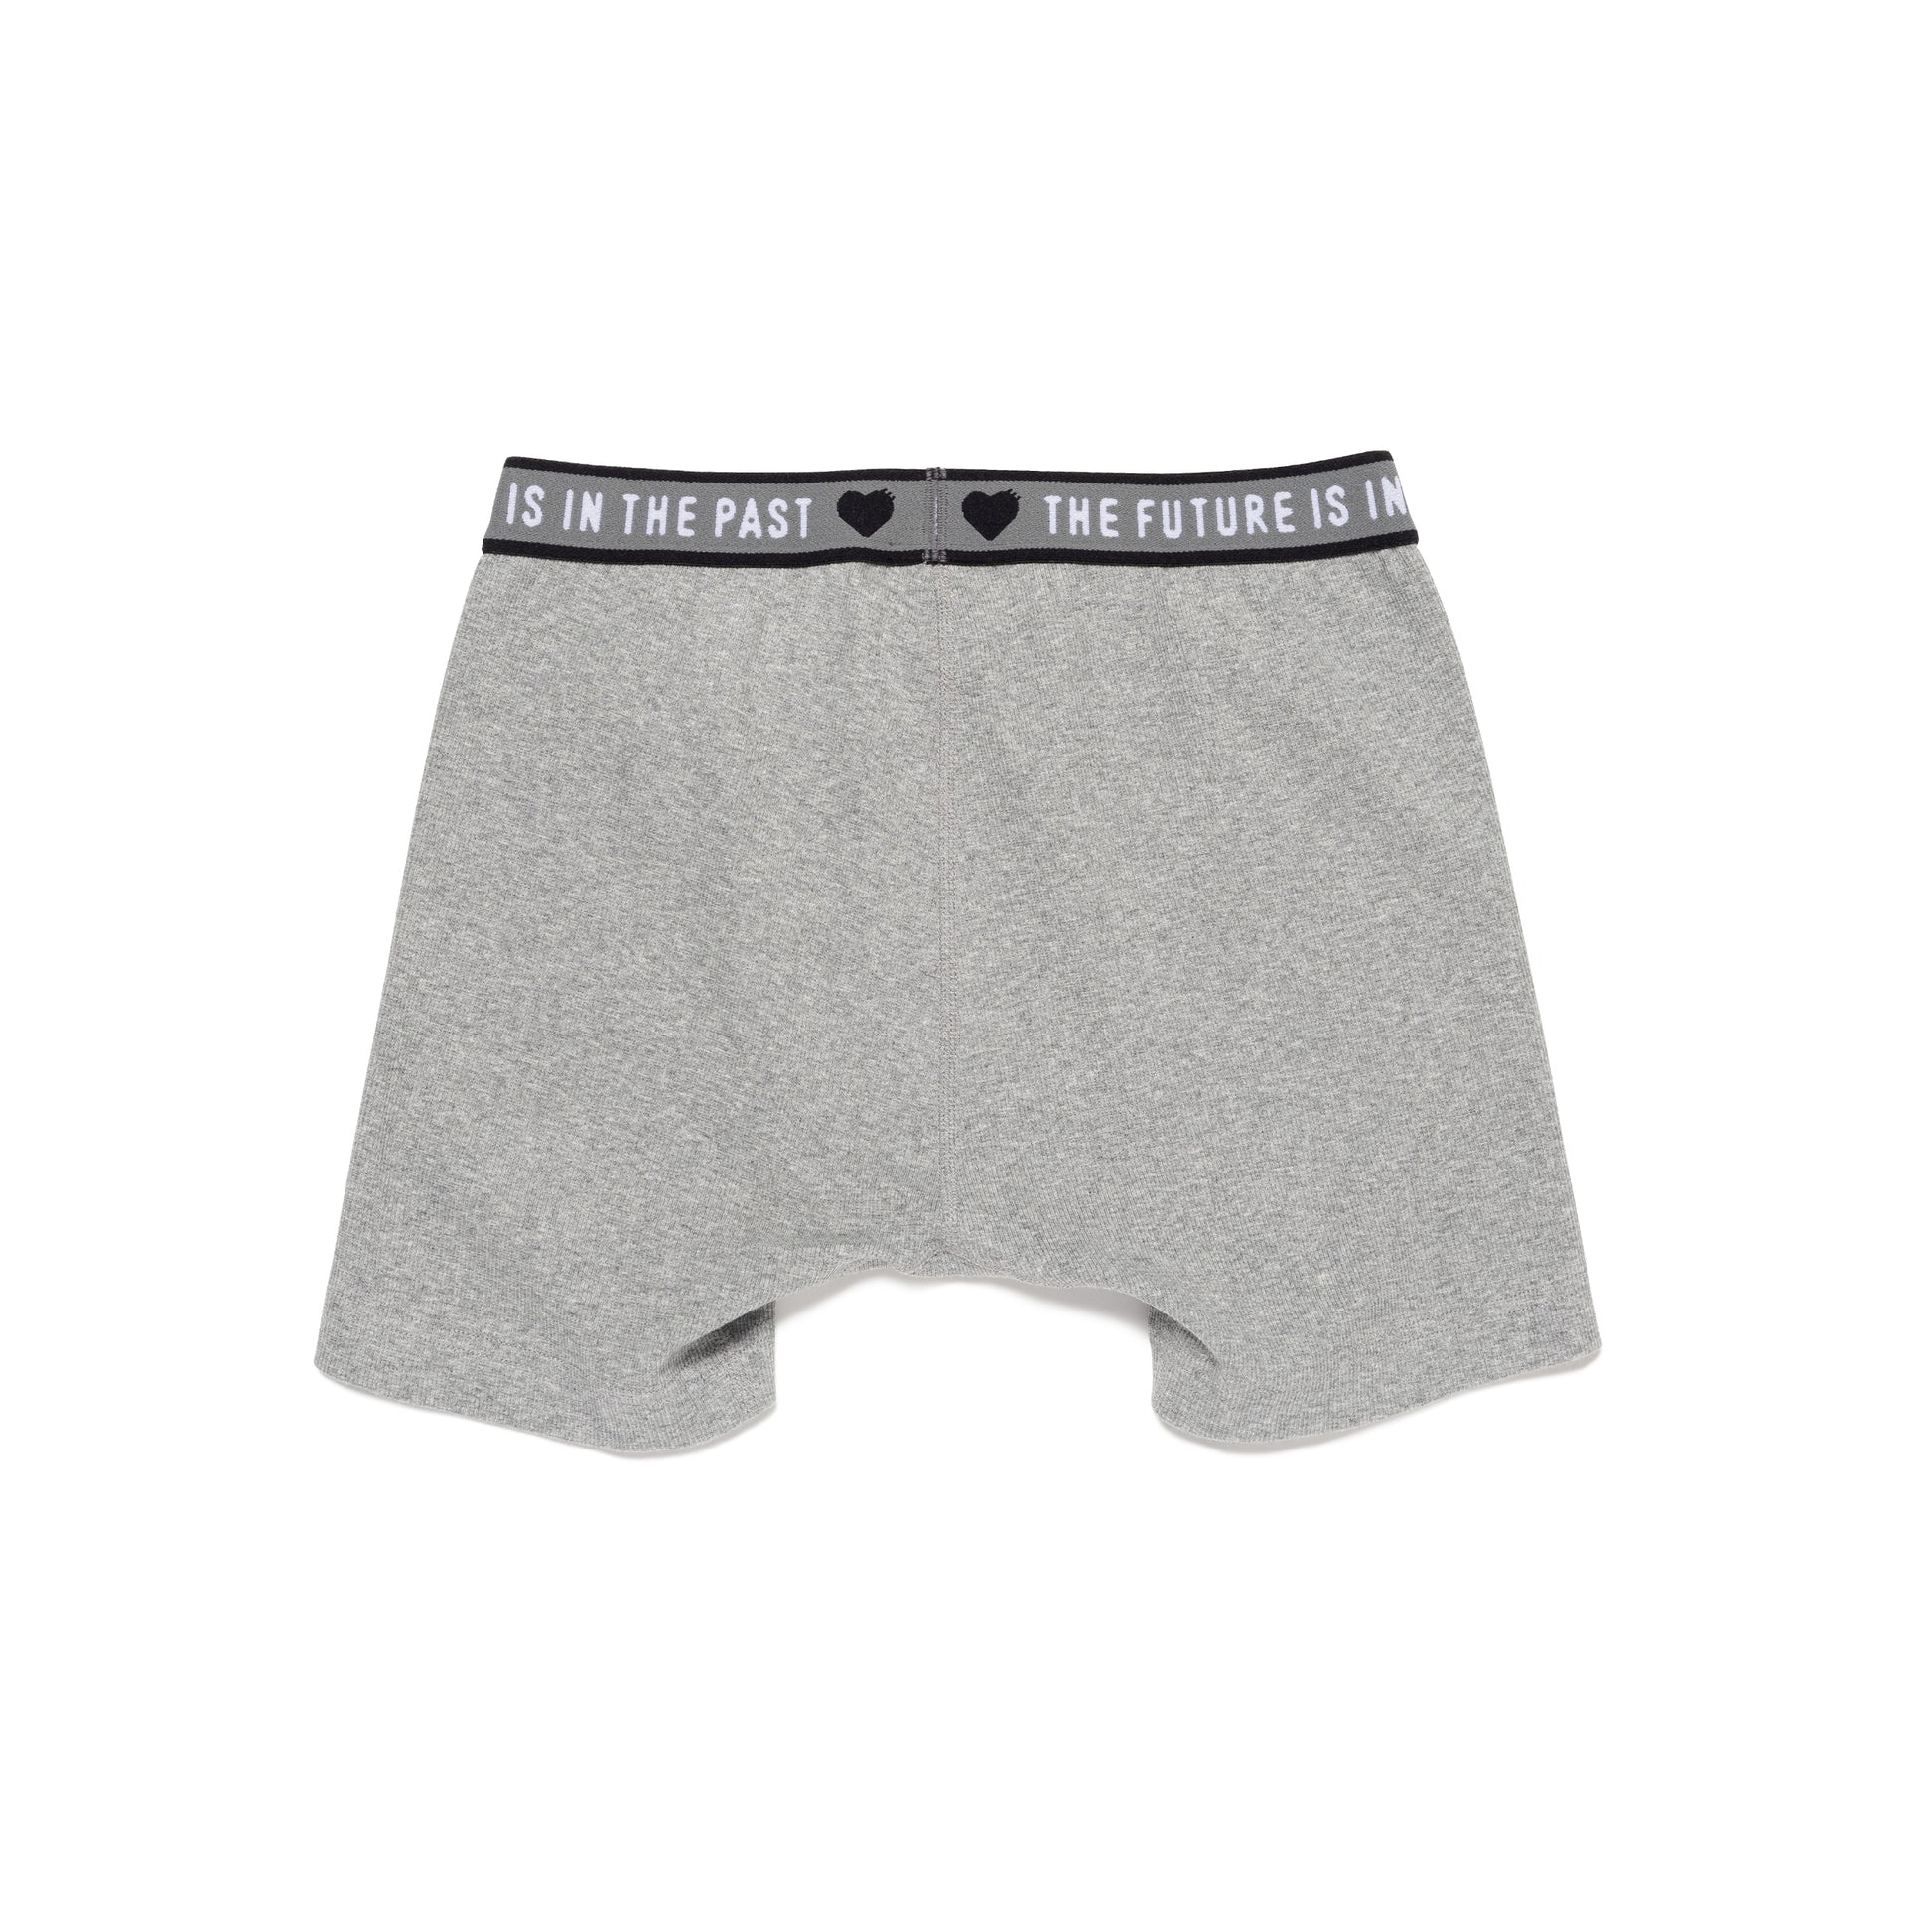 HUMAN MADE HM BOXER BRIEF GY-B